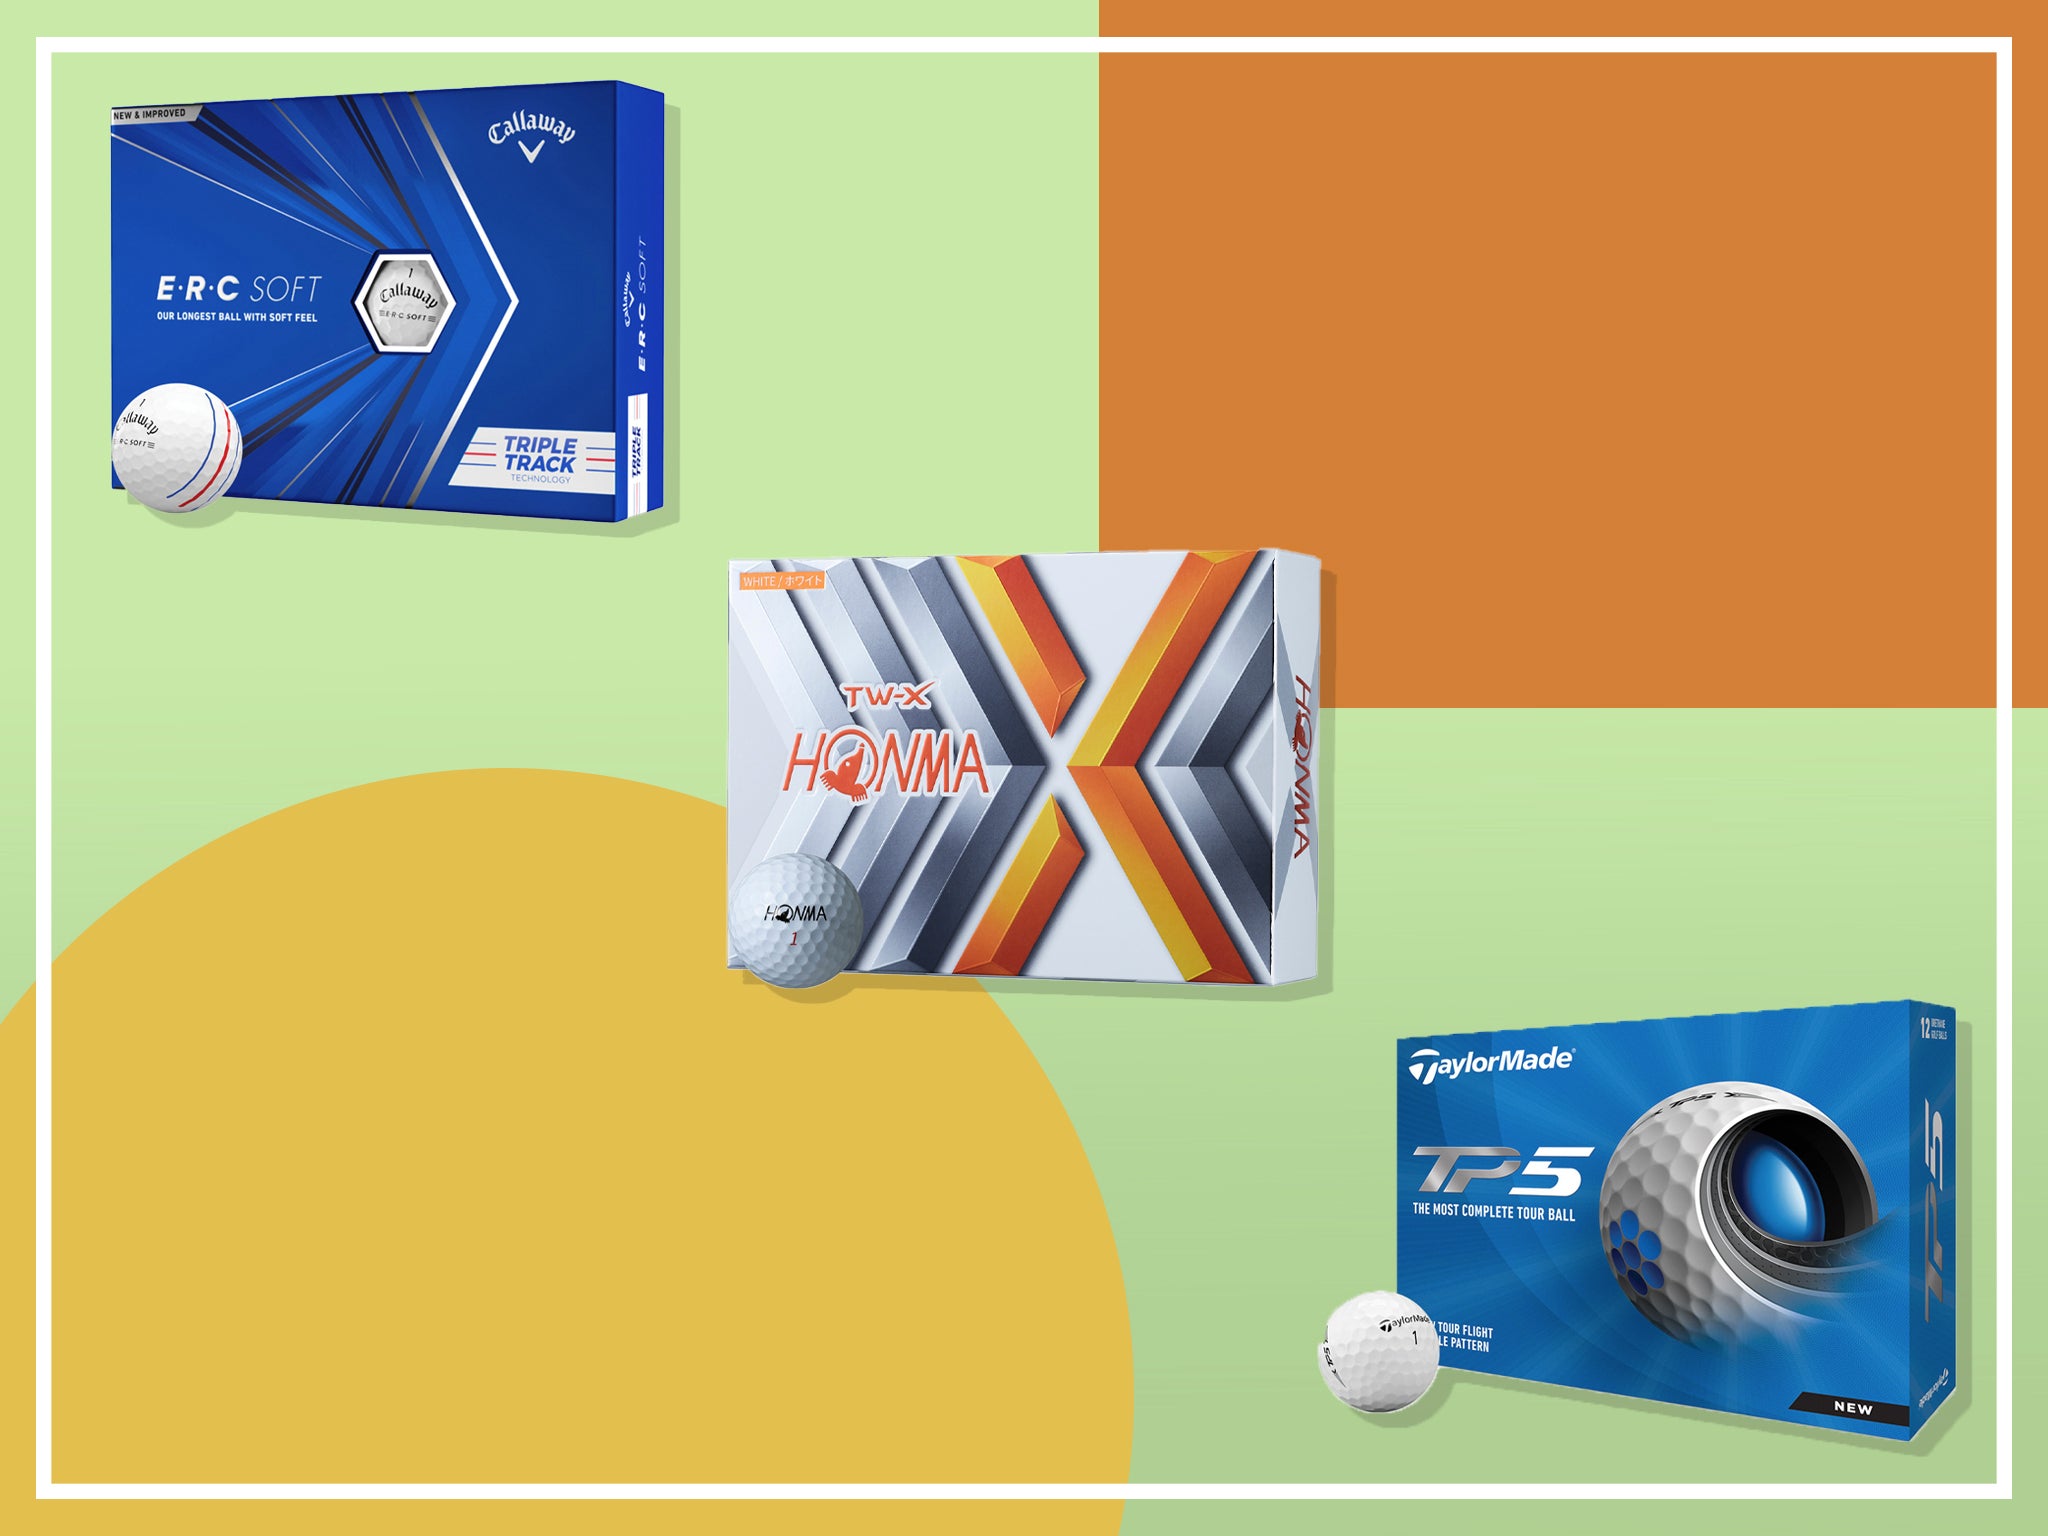 Best golf balls 2022: For high handicappers and beginners | The Independent